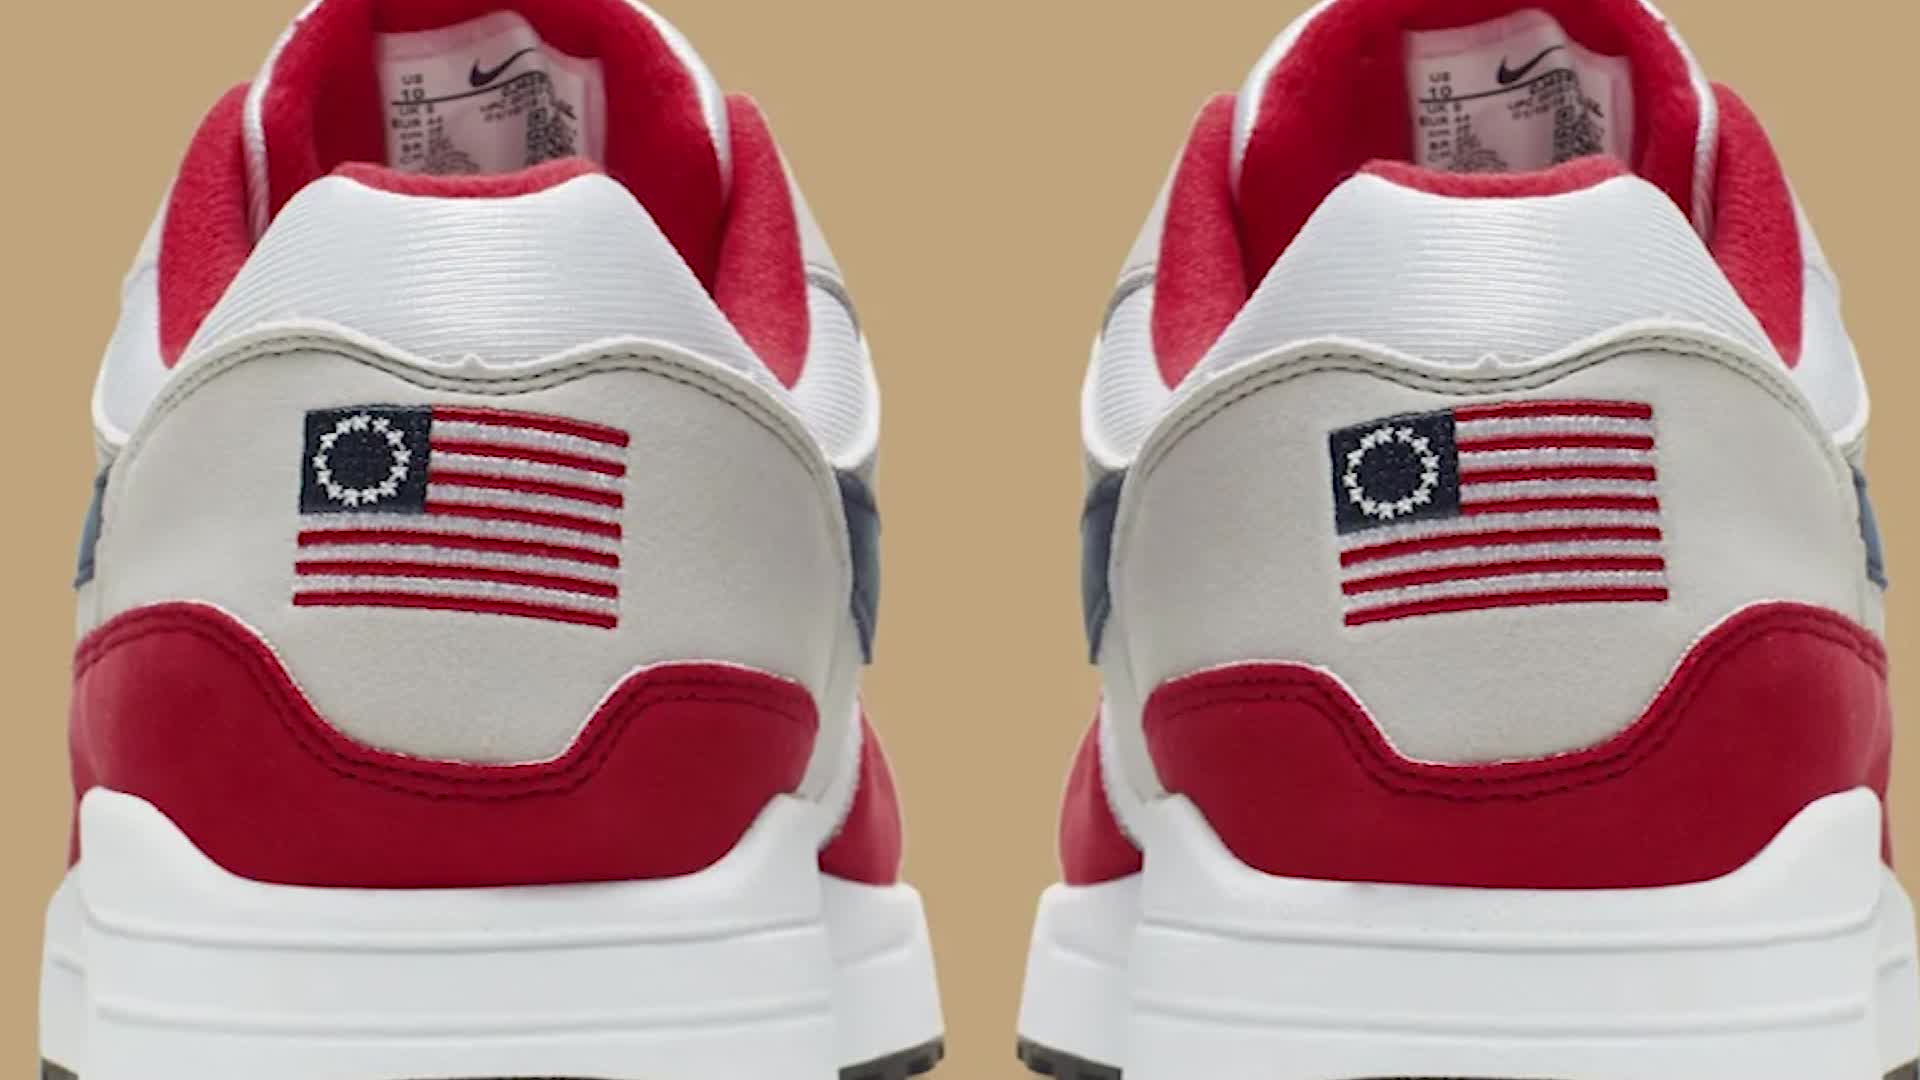 Nike featuring Betsy Ross flag after backlash Business